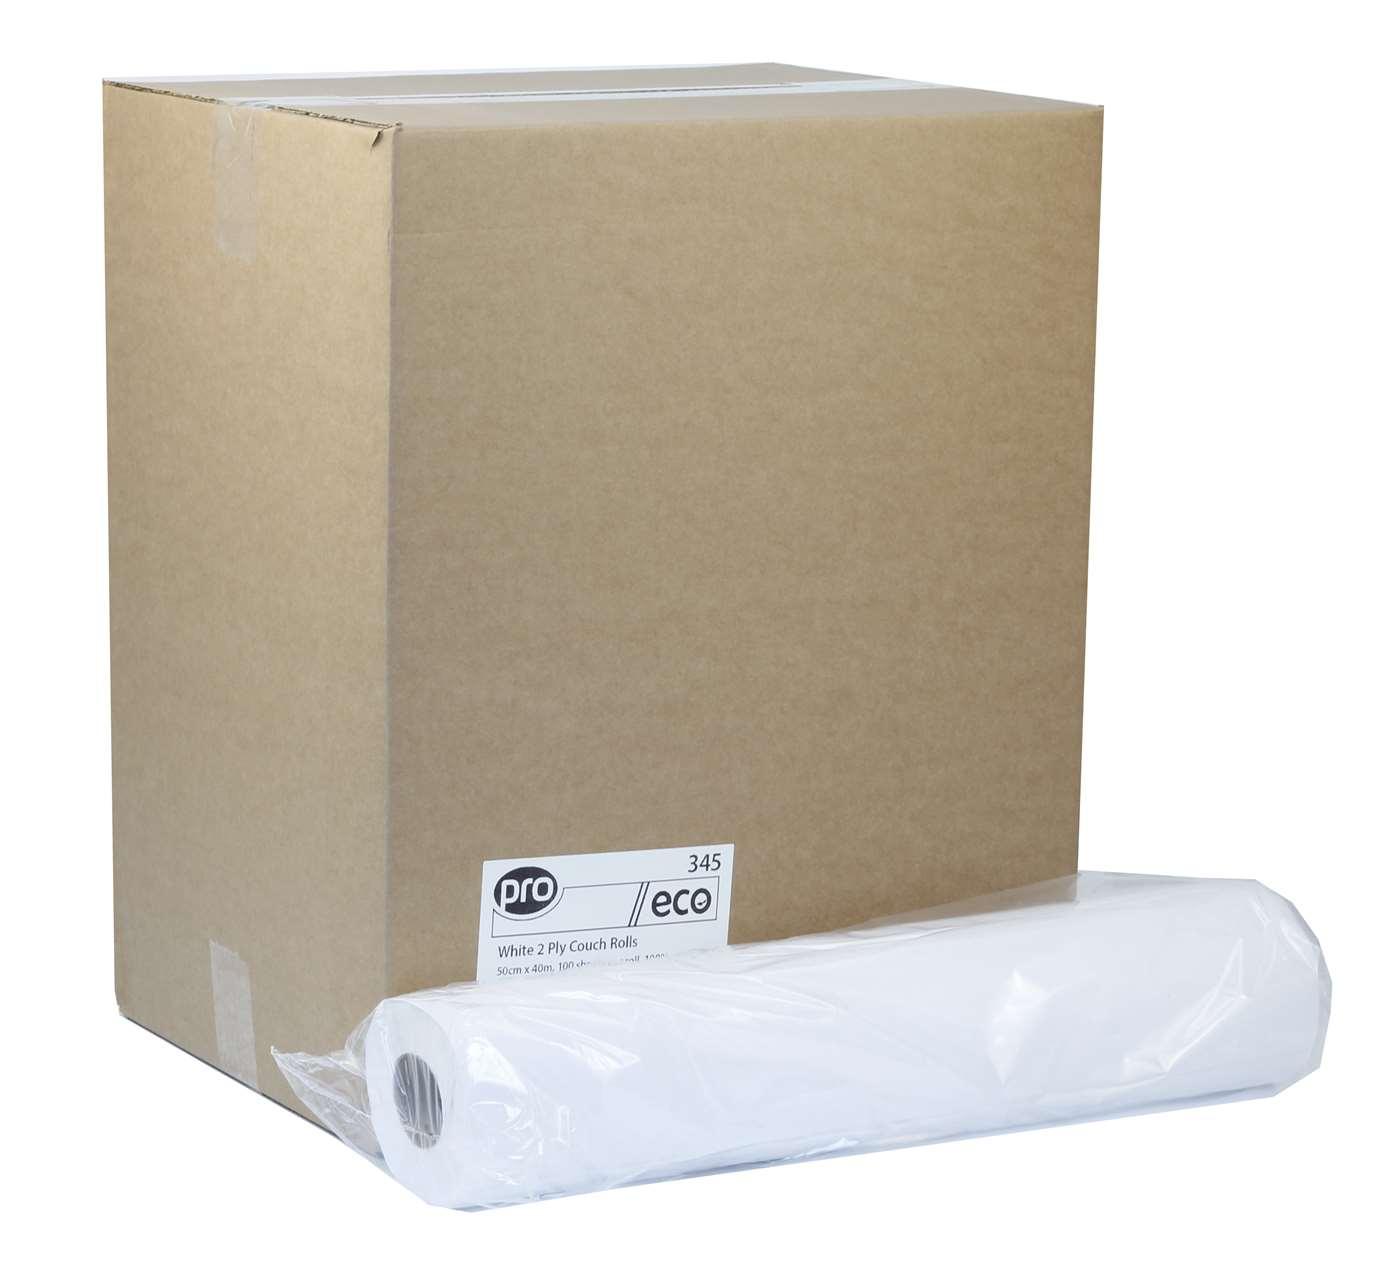 Couch Hygiene Roll 2ply White - 50cm x 40m (Pack of 12) - Vending Superstore